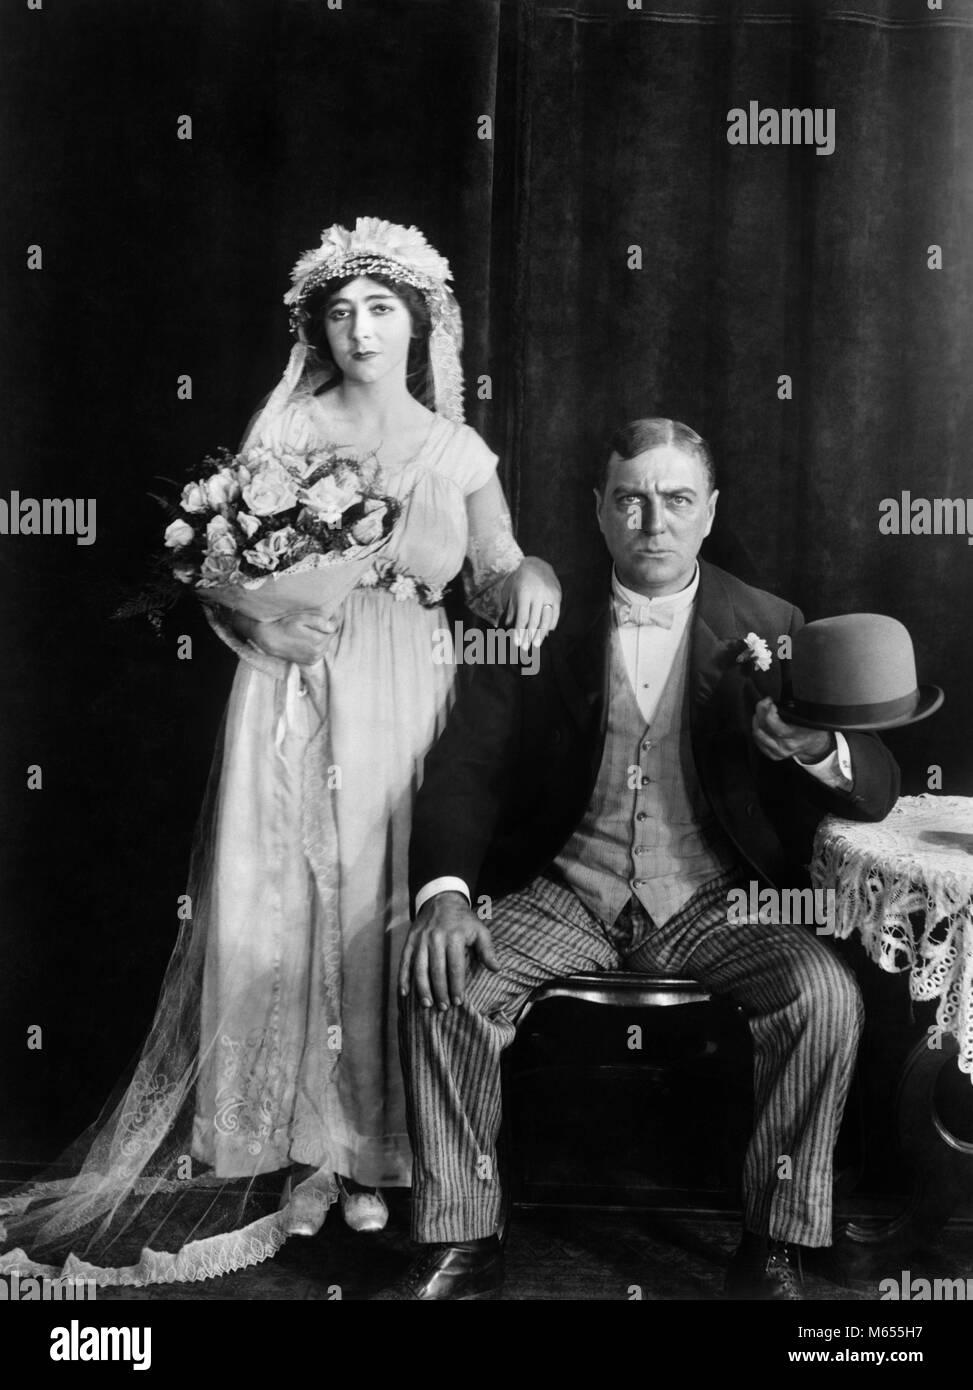 1890s 1910s WEDDING PORTRAIT SERIOUS BRIDE AND GROOM LOOKING AT CAMERA SILENT MOVIE STILL - asm02687 CAM001 HARS COPY SPACE FULL-LENGTH MARRIAGE 1900s COUPLES INDOORS CEREMONY EXPRESSIONS NOSTALGIA HUSBAND AND WIFE TOGETHERNESS EYE CONTACT 25-30 YEARS 30-35 YEARS WIVES BRIDES STERN VERTICAL 1910s SILENT MOVIE STILL TURN OF CENTURY MALES MARRY MID-ADULT MID-ADULT MAN MID-ADULT WOMAN SOMBER STIFF B&W BLACK AND WHITE CAUCASIAN ETHNICITY CEREMONIES GROOMS LOOKING AT CAMERA OLD FASHIONED PERSONS Stock Photo